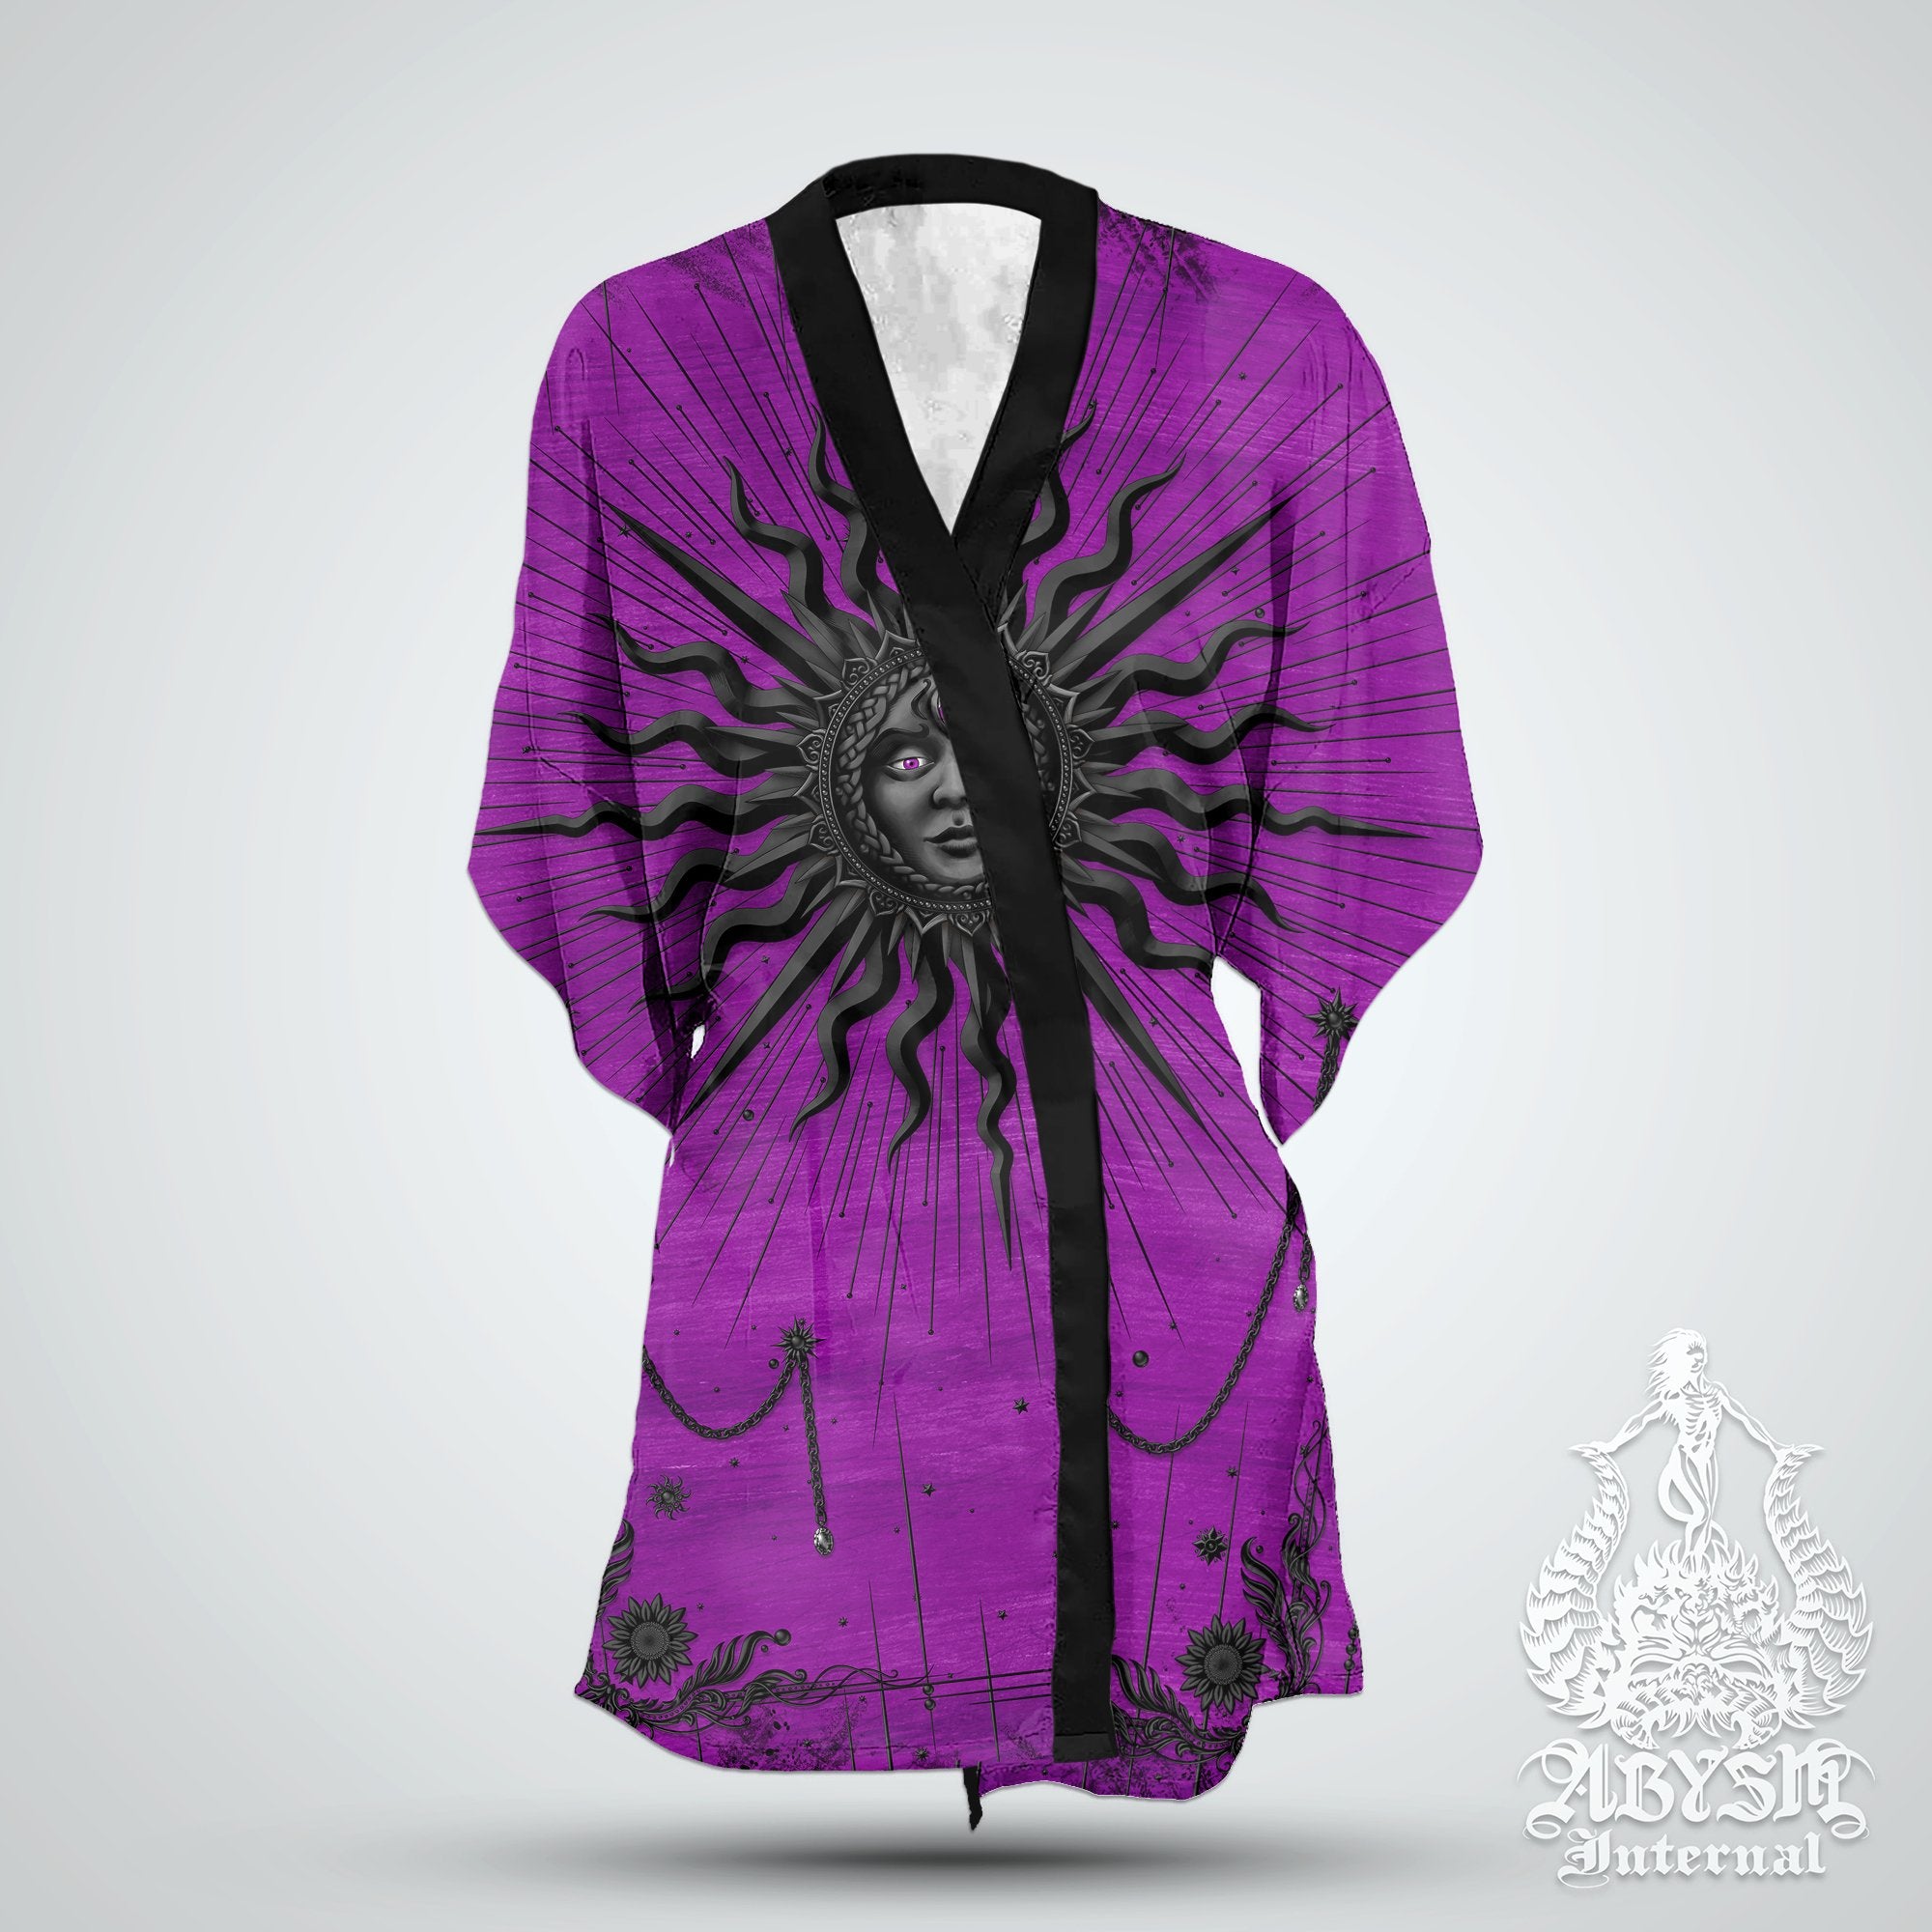 Pastel Goth Short Kimono Robe, Sun Beach Party Outfit, Tarot Arcana Coverup, Black and Purple Summer Festival Top, Whimsigoth Clothing, Unisex - Abysm Internal